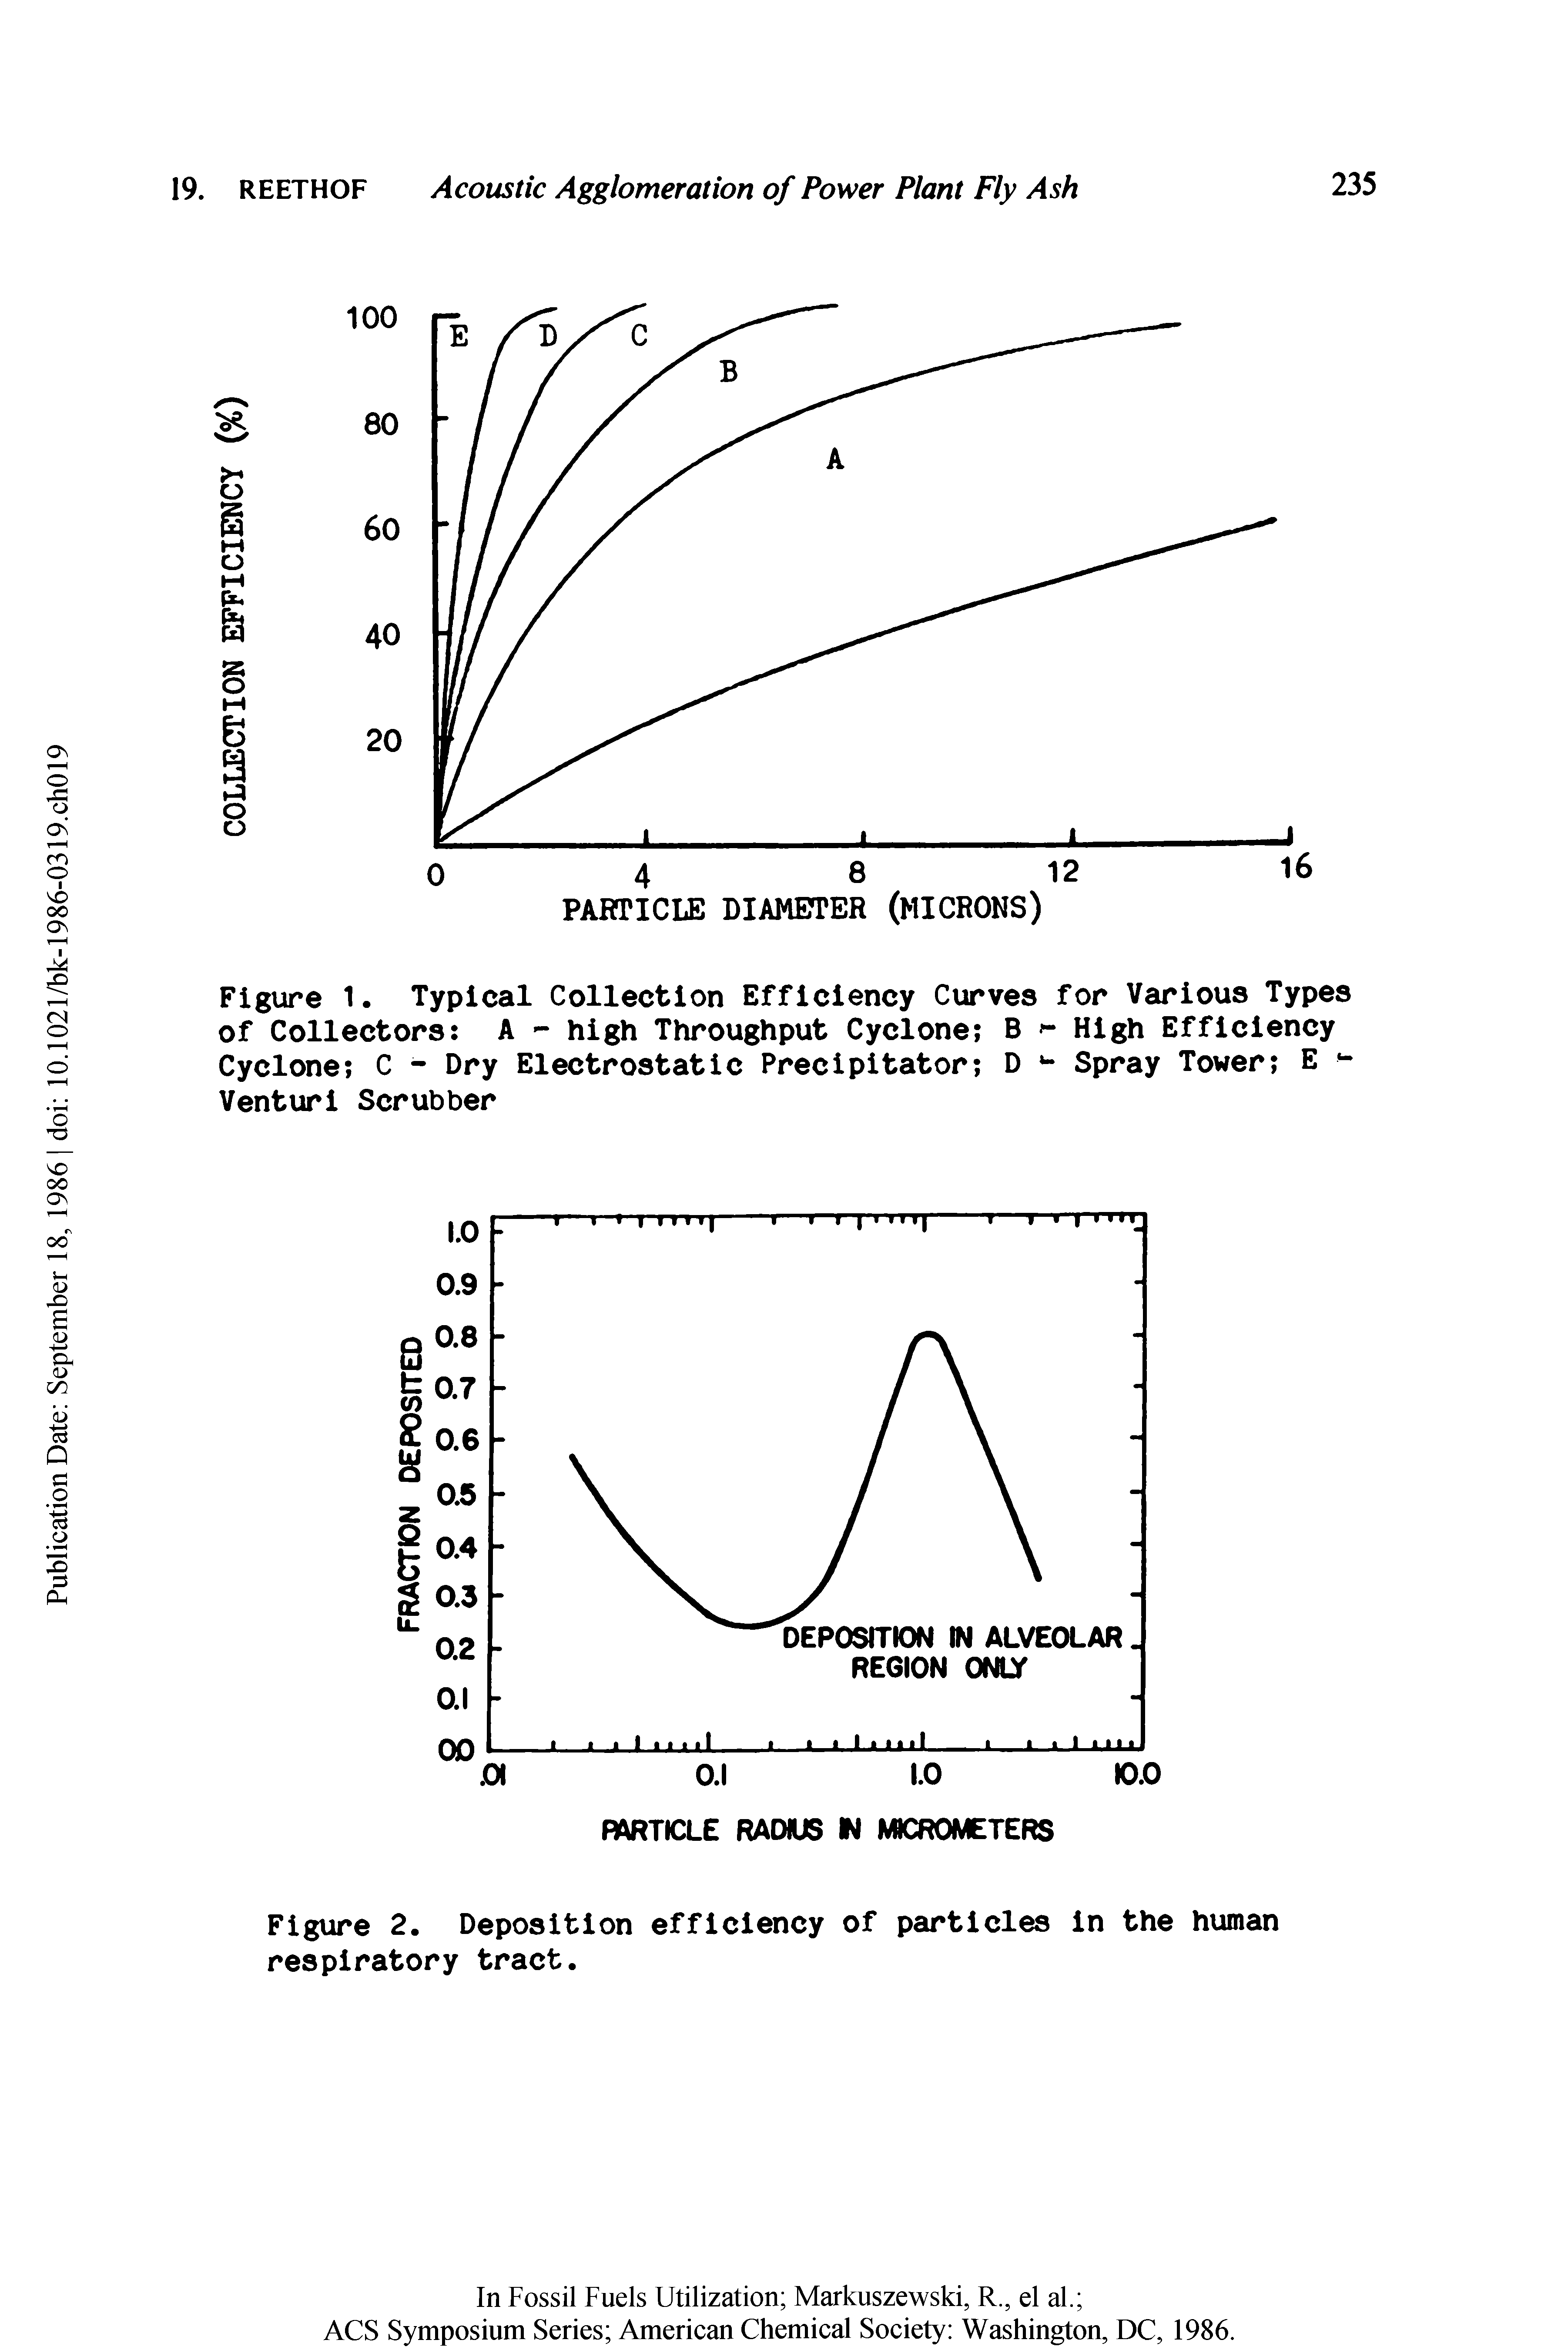 Figure 2. Deposition efficiency of particles in the human respiratory tract.